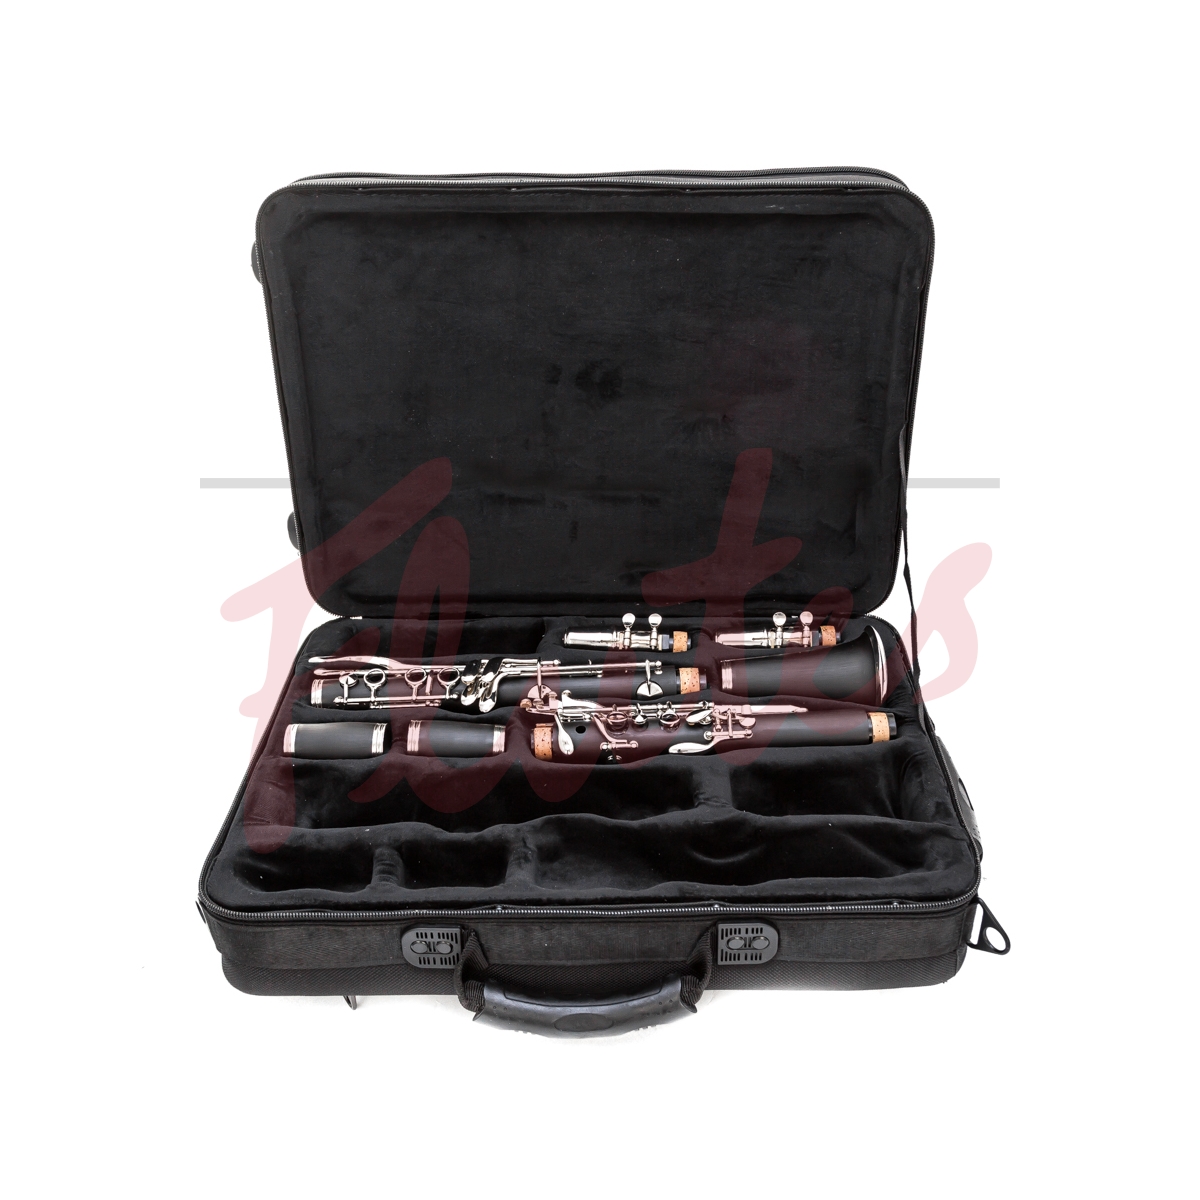 Fairfield JCL-210 A Clarinet in Double Case